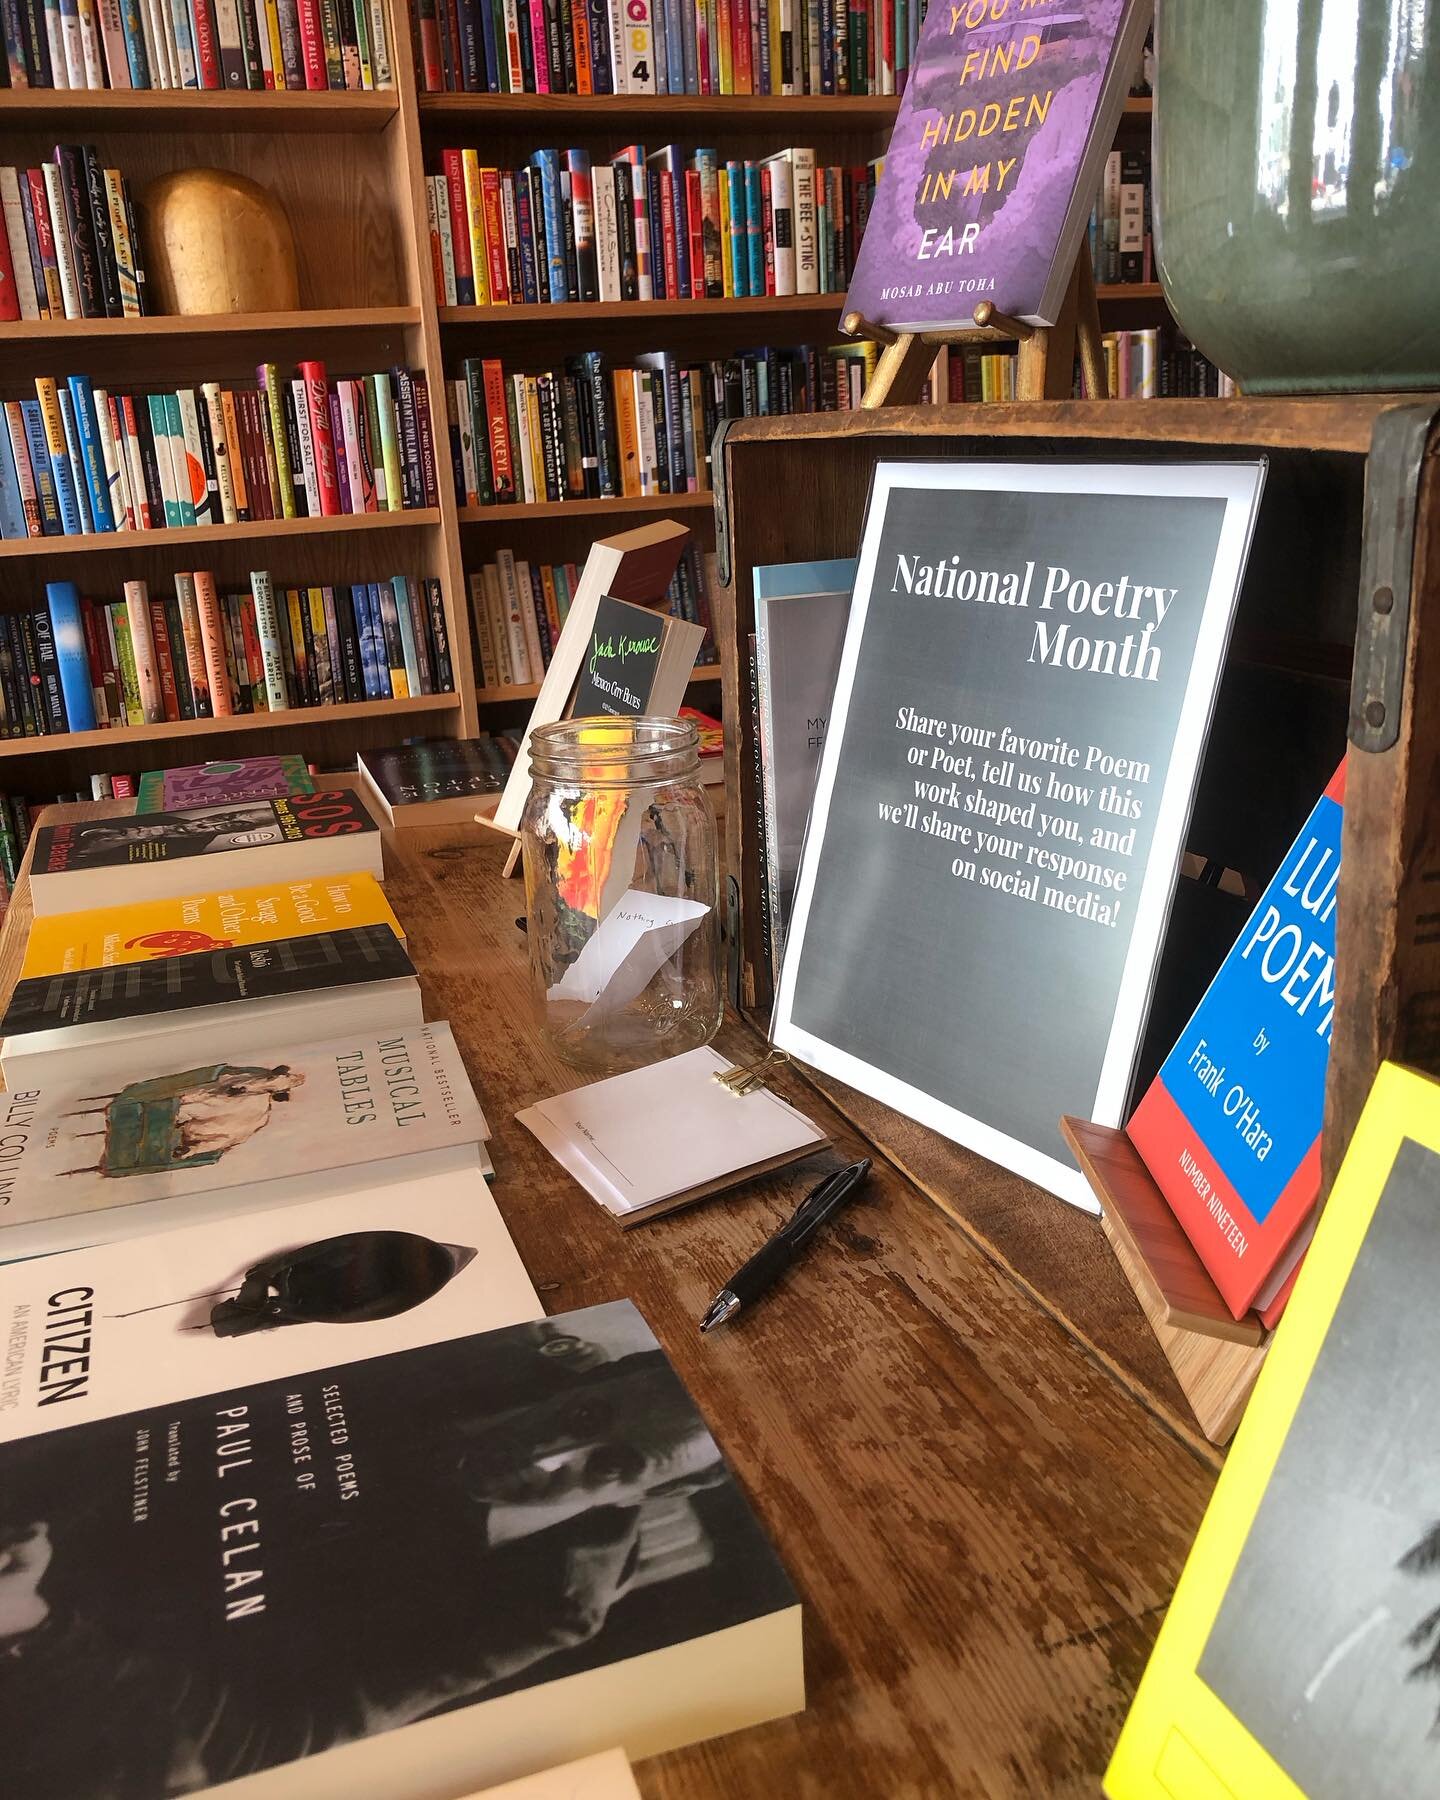 April is National Poetry Month, and we&rsquo;ve curated a little something for everyone here at #glendorabookshopmi 💐 Whether you&rsquo;re well-versed, or brand new to the poetry scene, we&rsquo;re sure to have something that speaks to you. See ya s